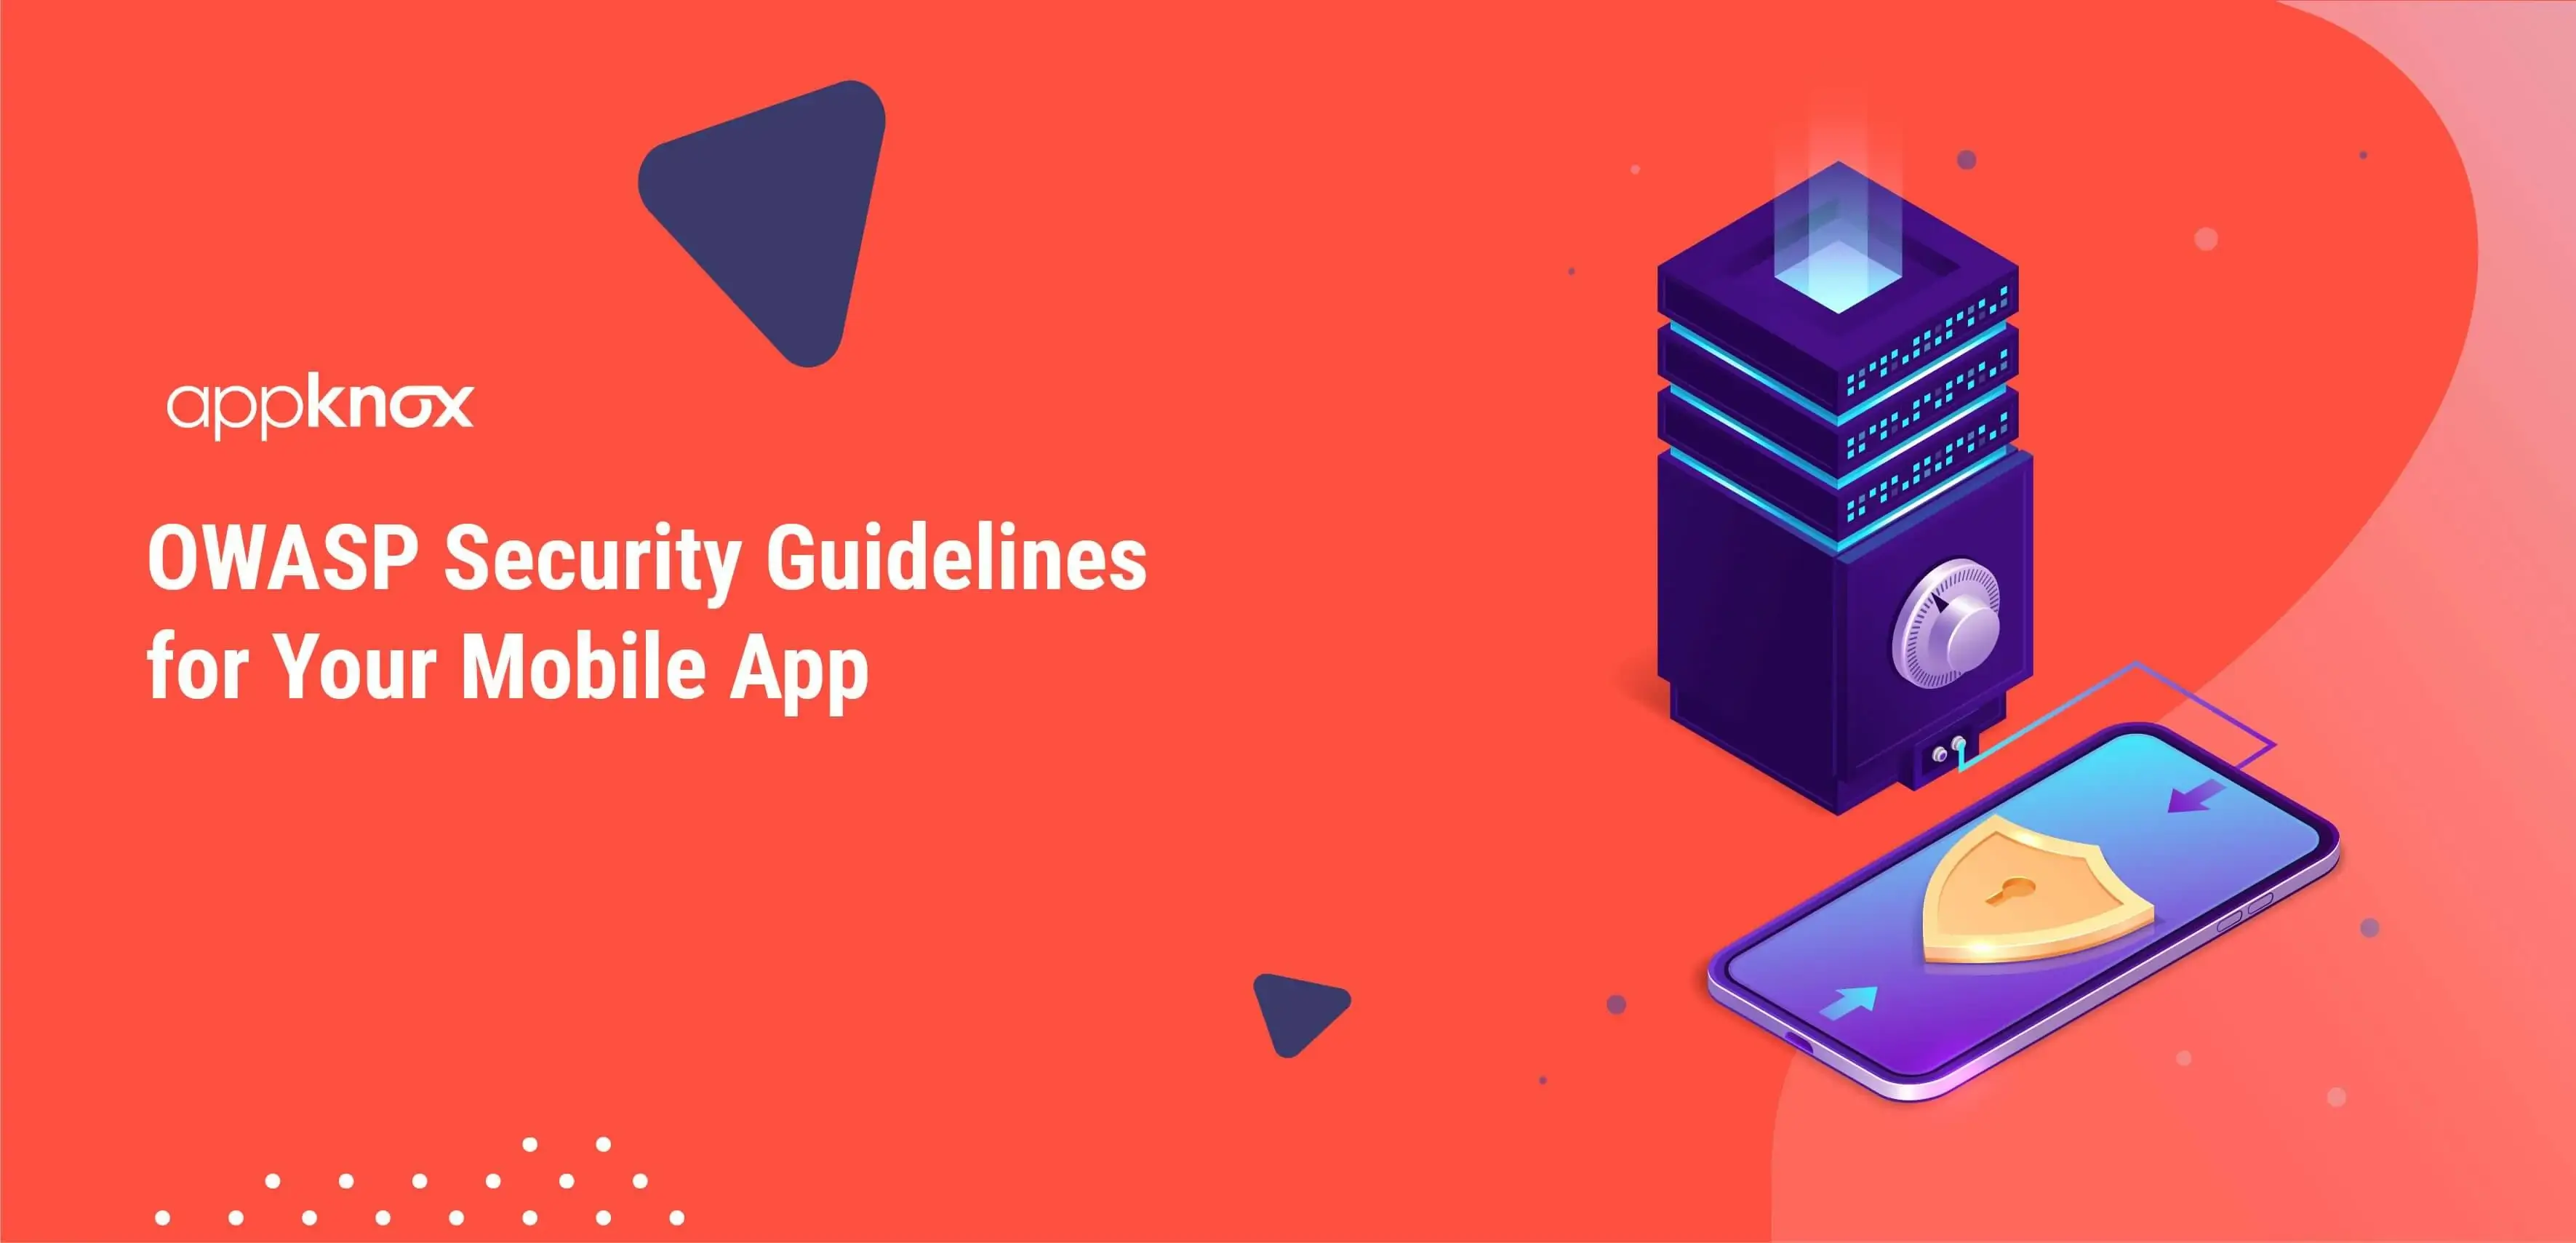 OWASP Security Guidelines for Your Mobile App